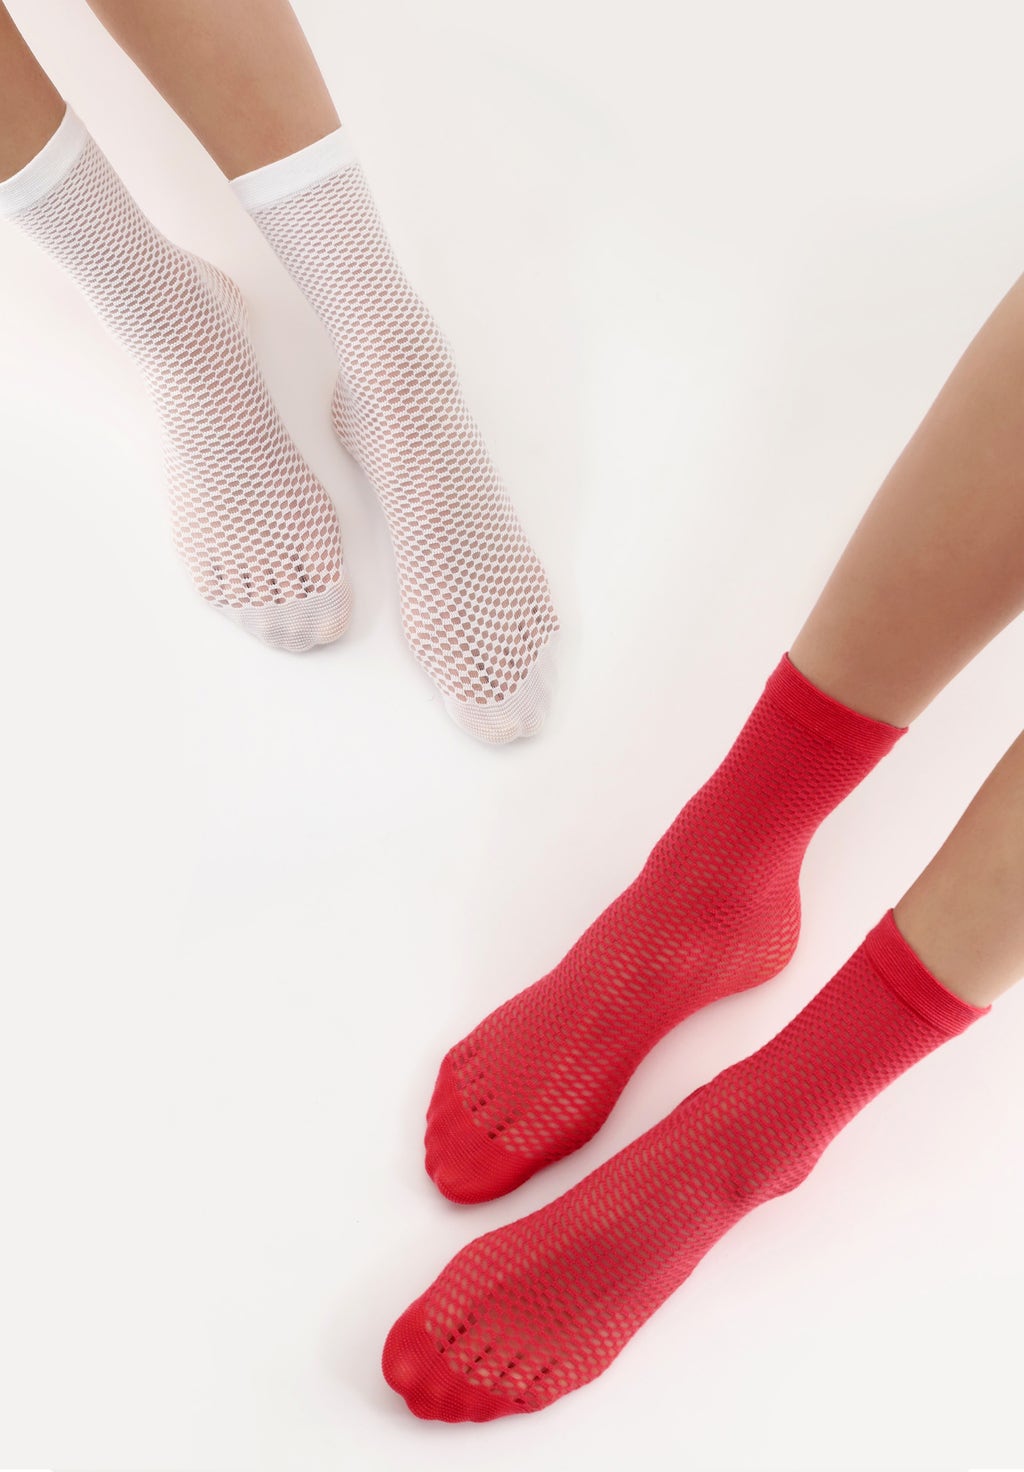 OroblÌ_ Twin Net Sock - Coral red and white cotton mix quarter high ankle tube socks twin pack with an enclosed fishnet style pattern, plain toe and thin cuff.